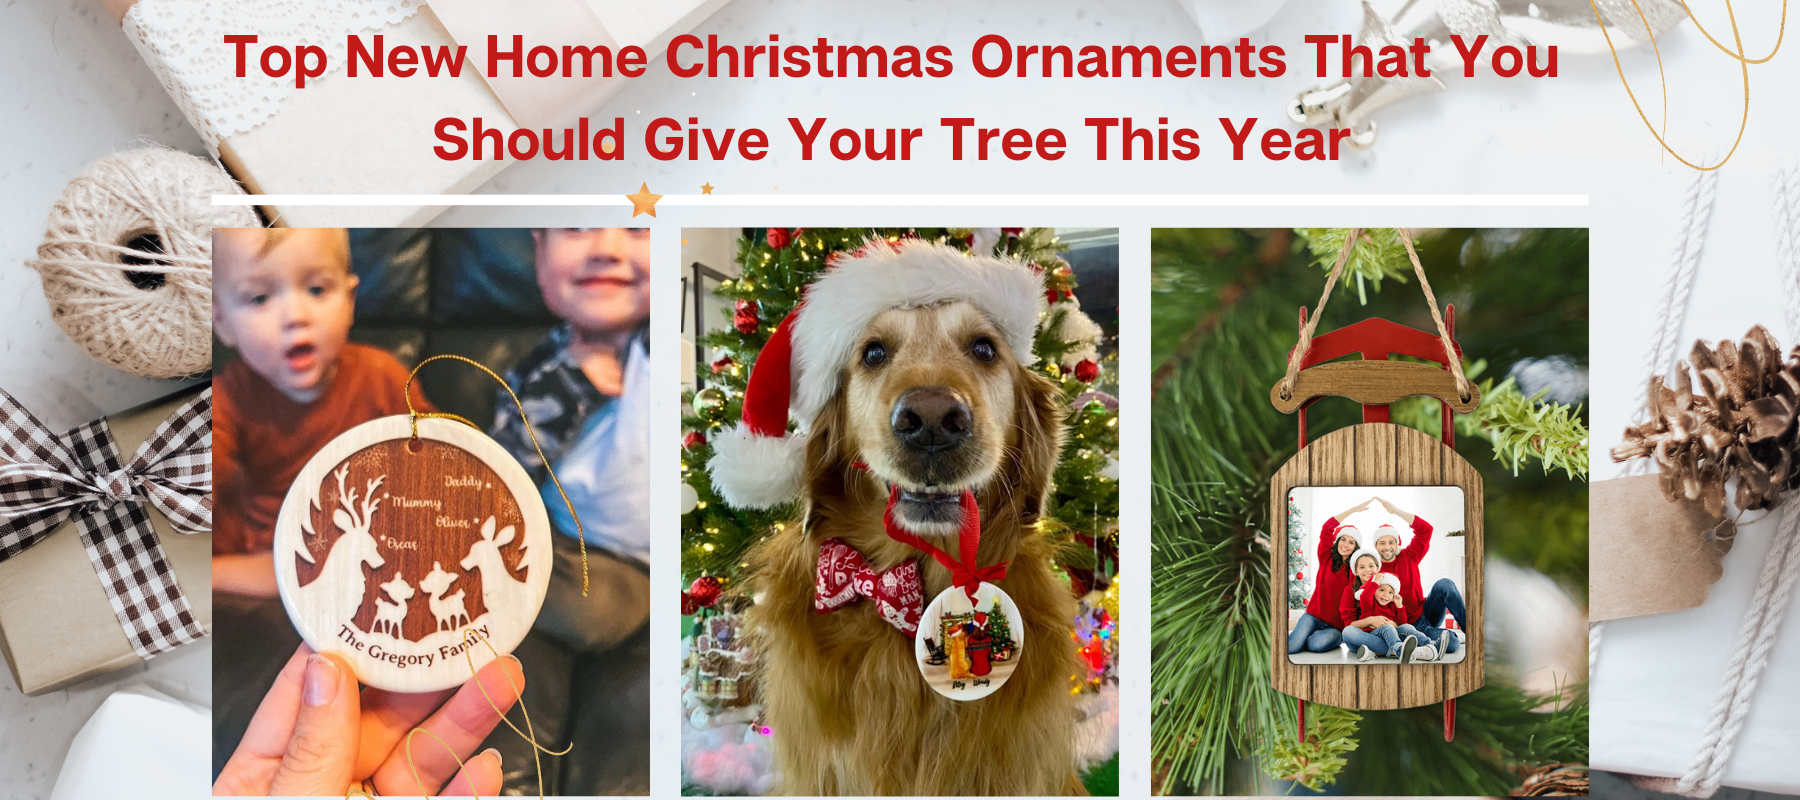 Top New Home Christmas Ornaments That You Should Give Your Tree This Year